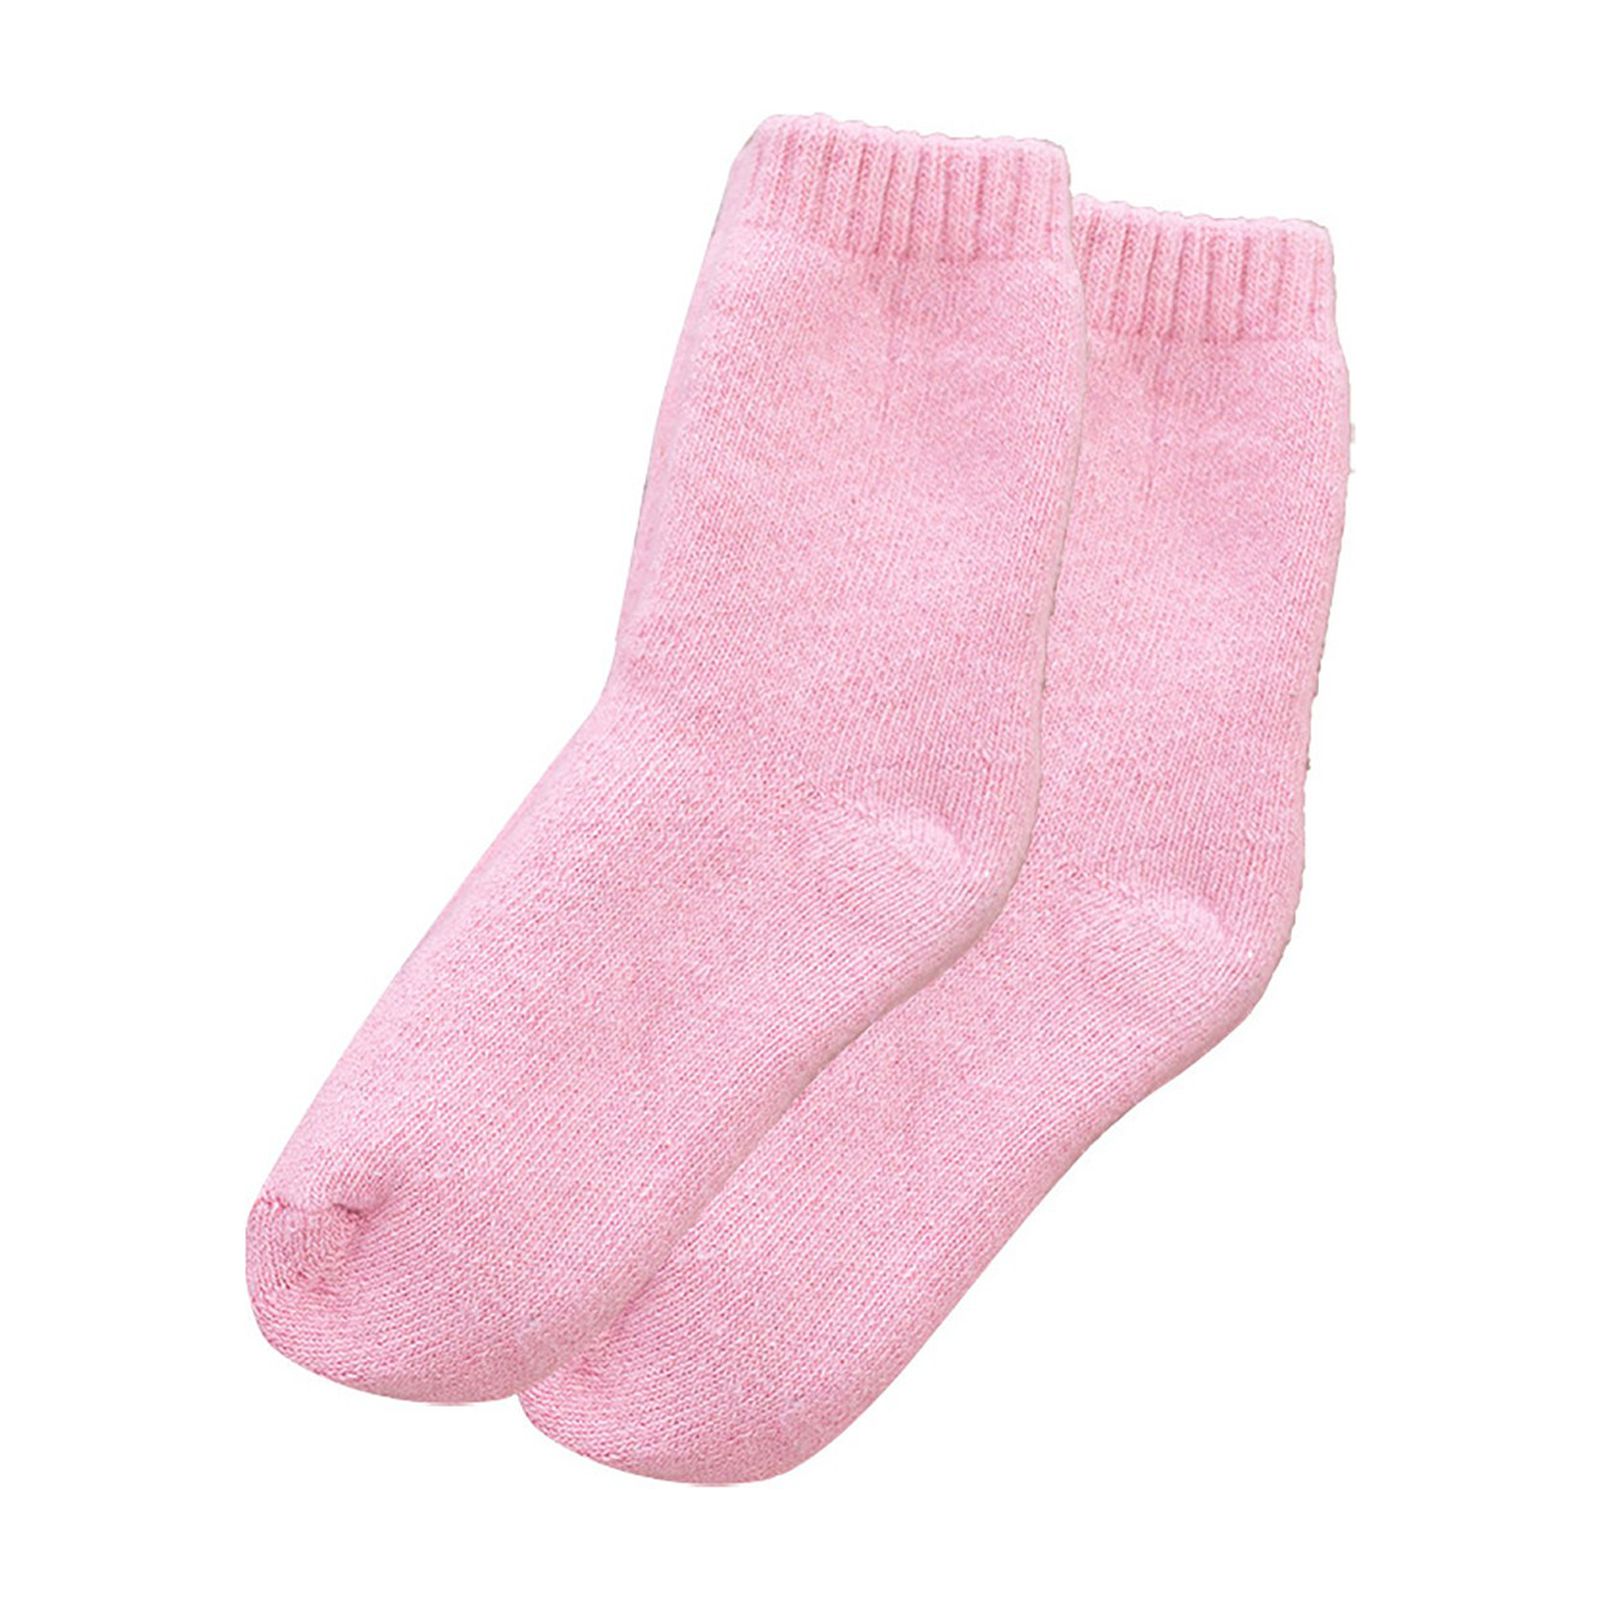 Eguiwyn Promotion Sale, Compression Socks for Women Autumn And Winter ...